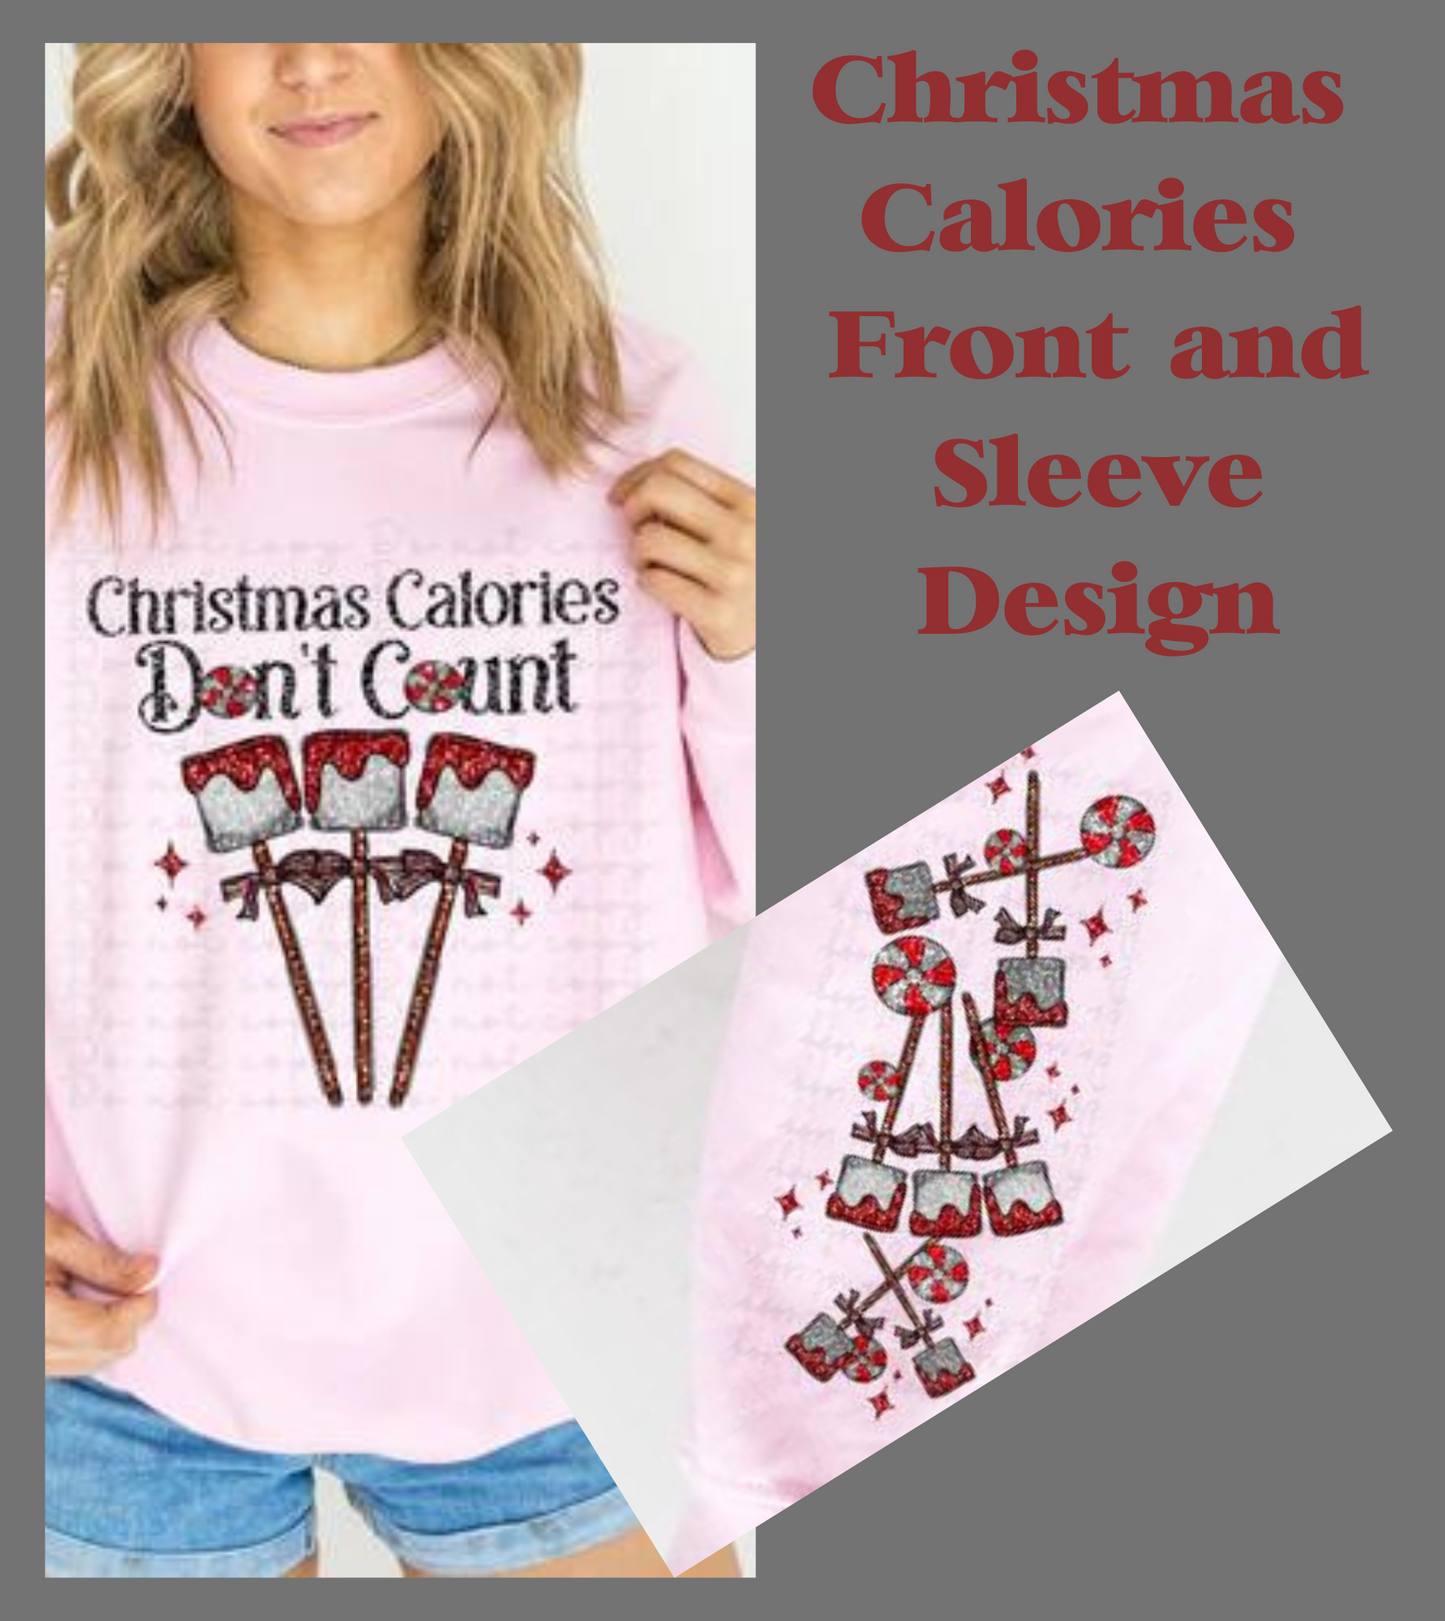 Christmas Calories Don't Count with Sleeve Design